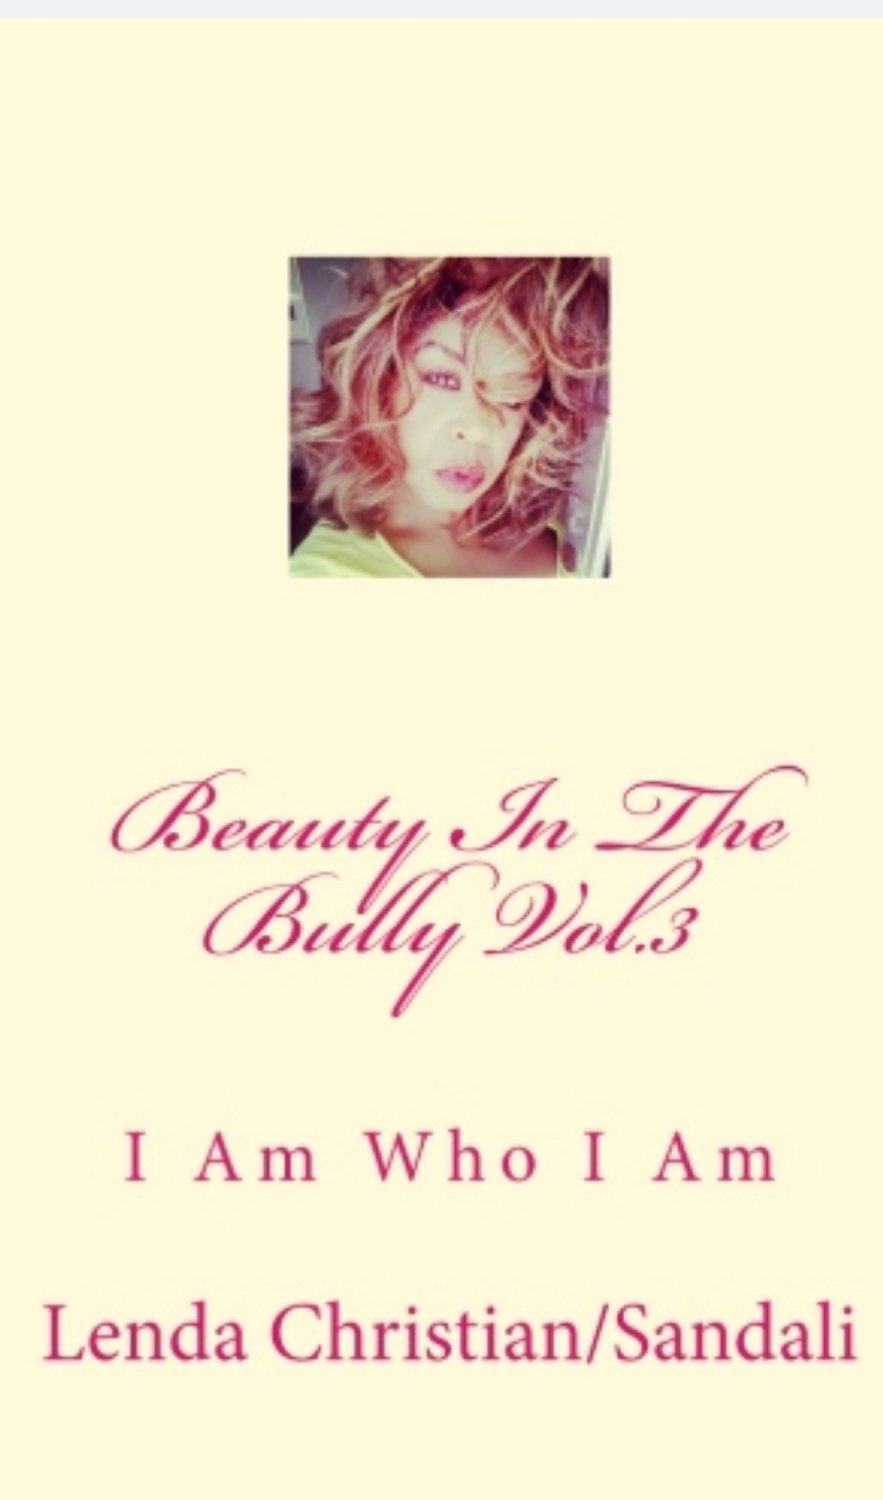 Beauty In The Bully Vol.3